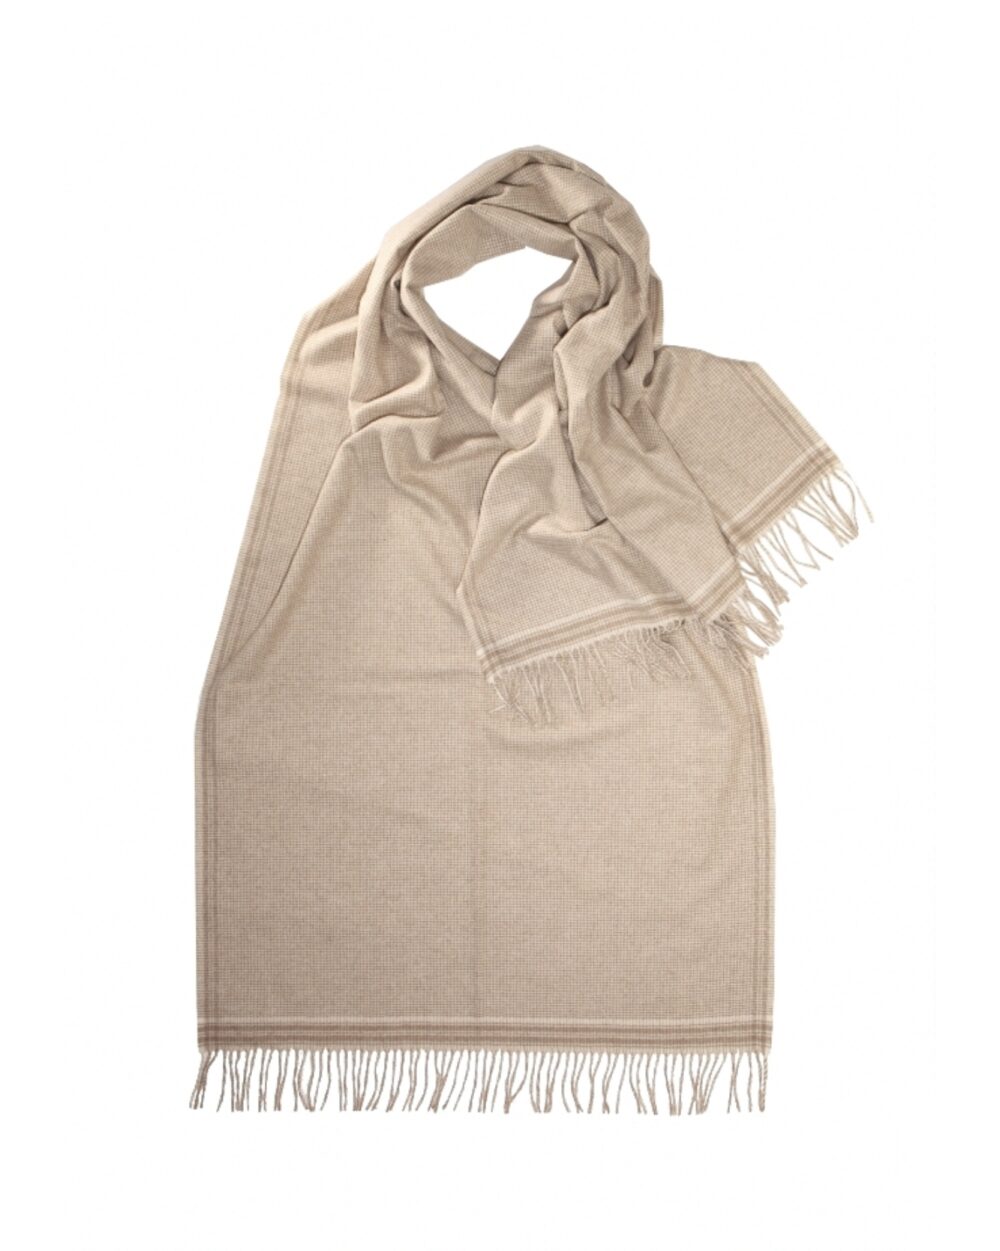 NATURAL 100% CASHMERE STOLE | GLEN PRINCE | MADE IN SCOTLAND